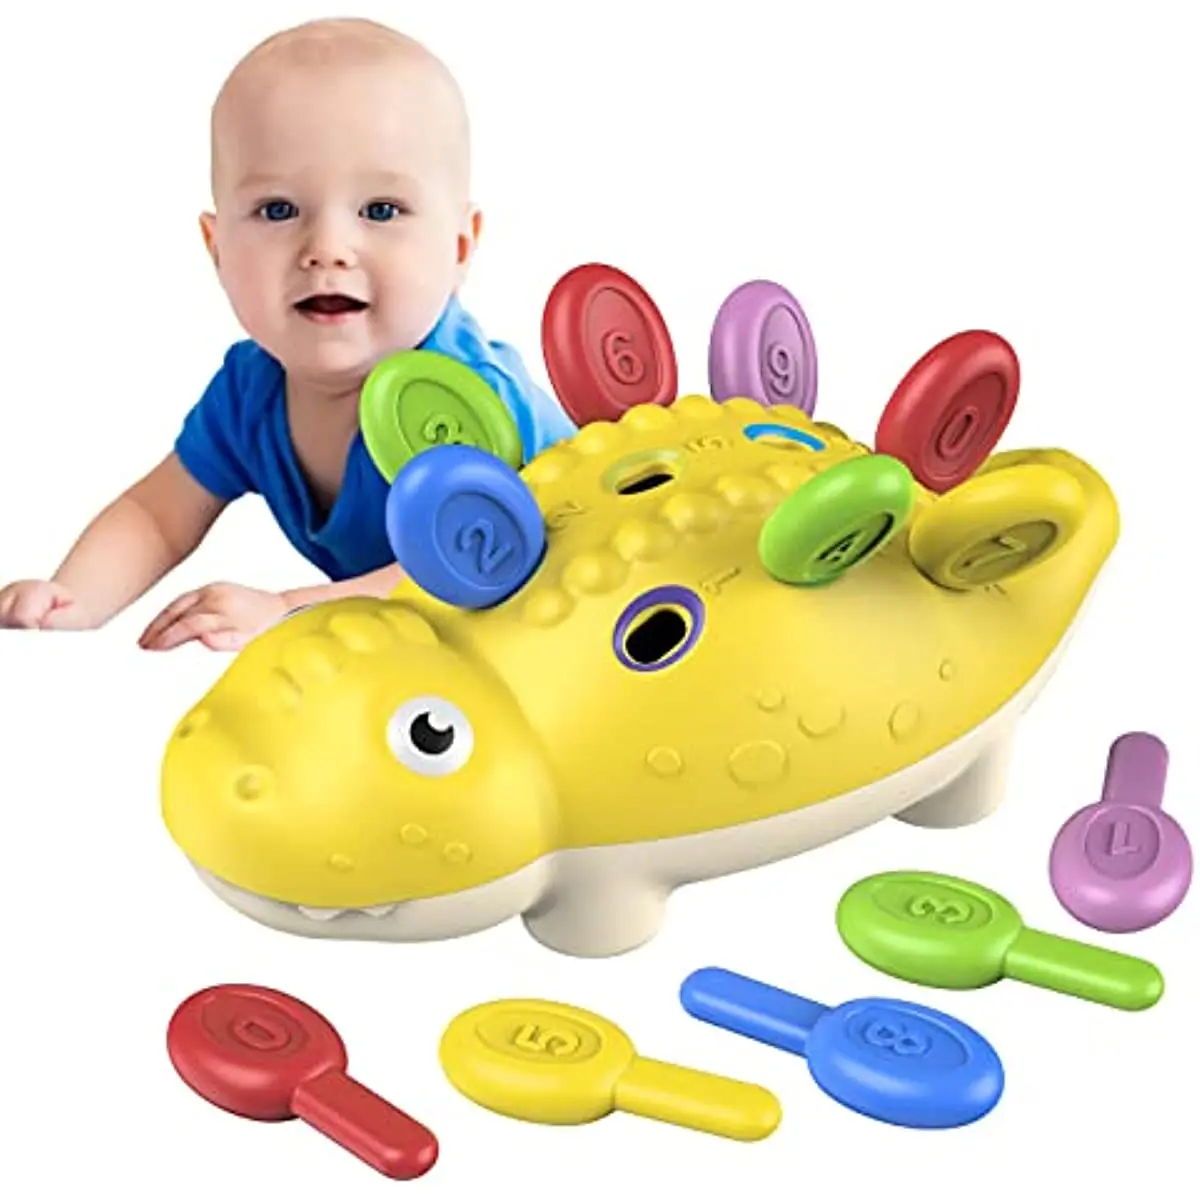 

Baby Motor Skill Sensory Toys for 12-24 Month Matching Sorter Toy Hand-eye Training Dinosaur Toy Toddler Color Numbers Cognition